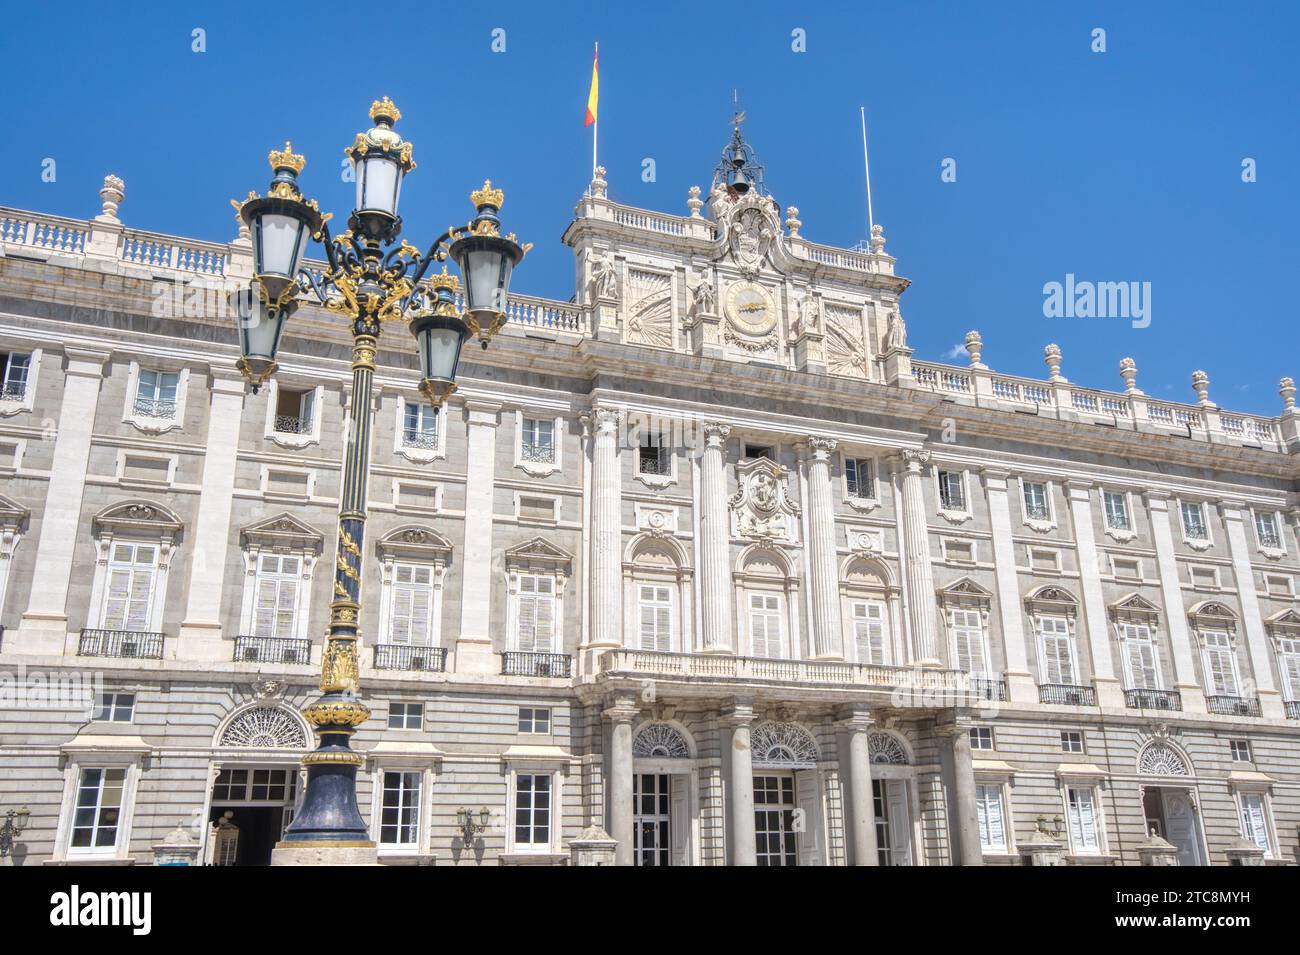 Facade of the historic Royal Palace in Madrid, Spain Stock Photo